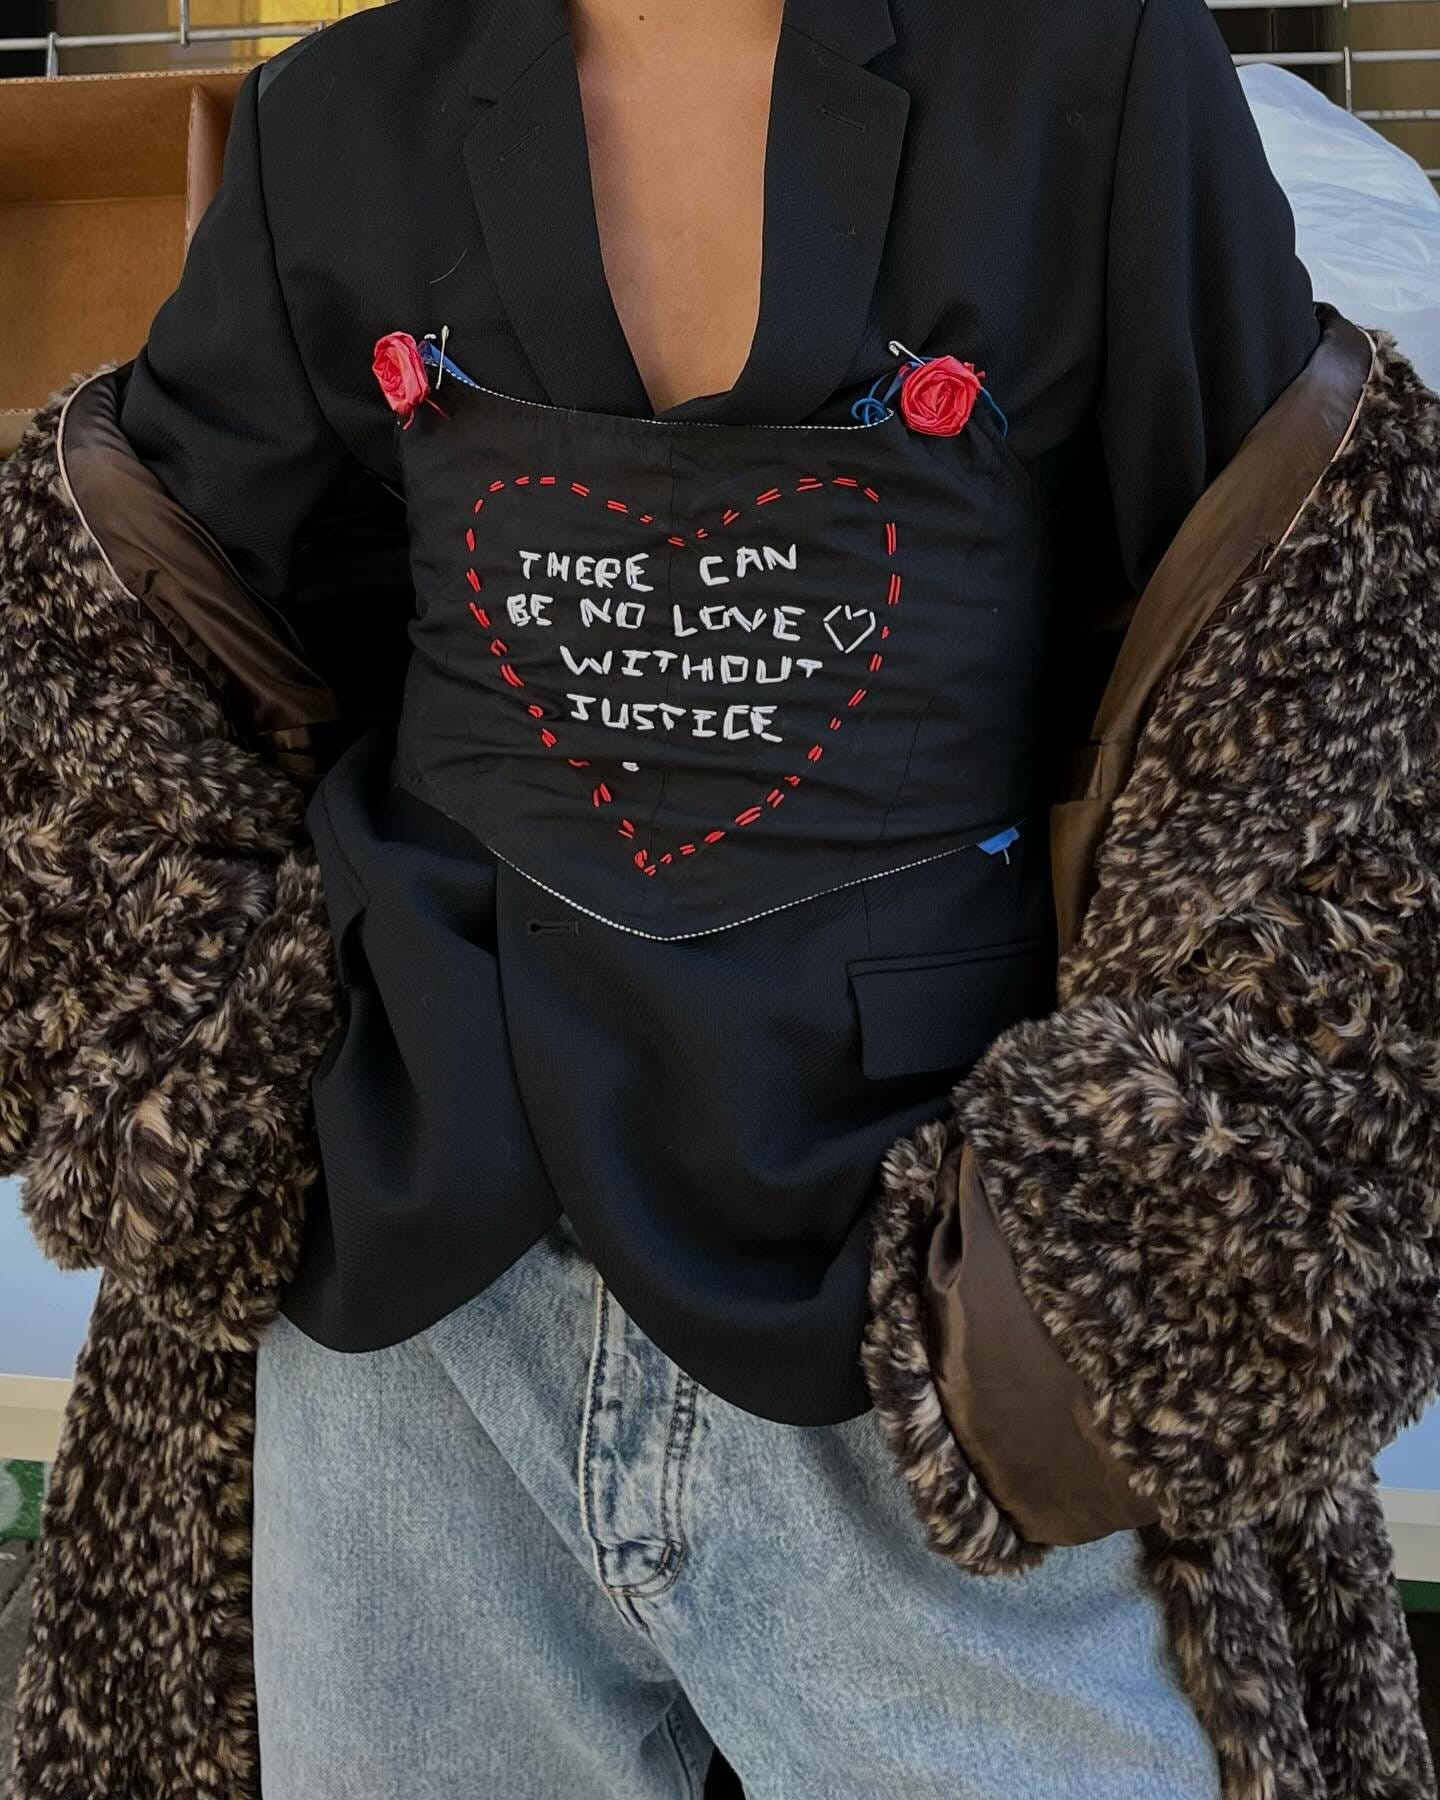 Revolutionary Fashion: How Clothing Can Empower Social Movements